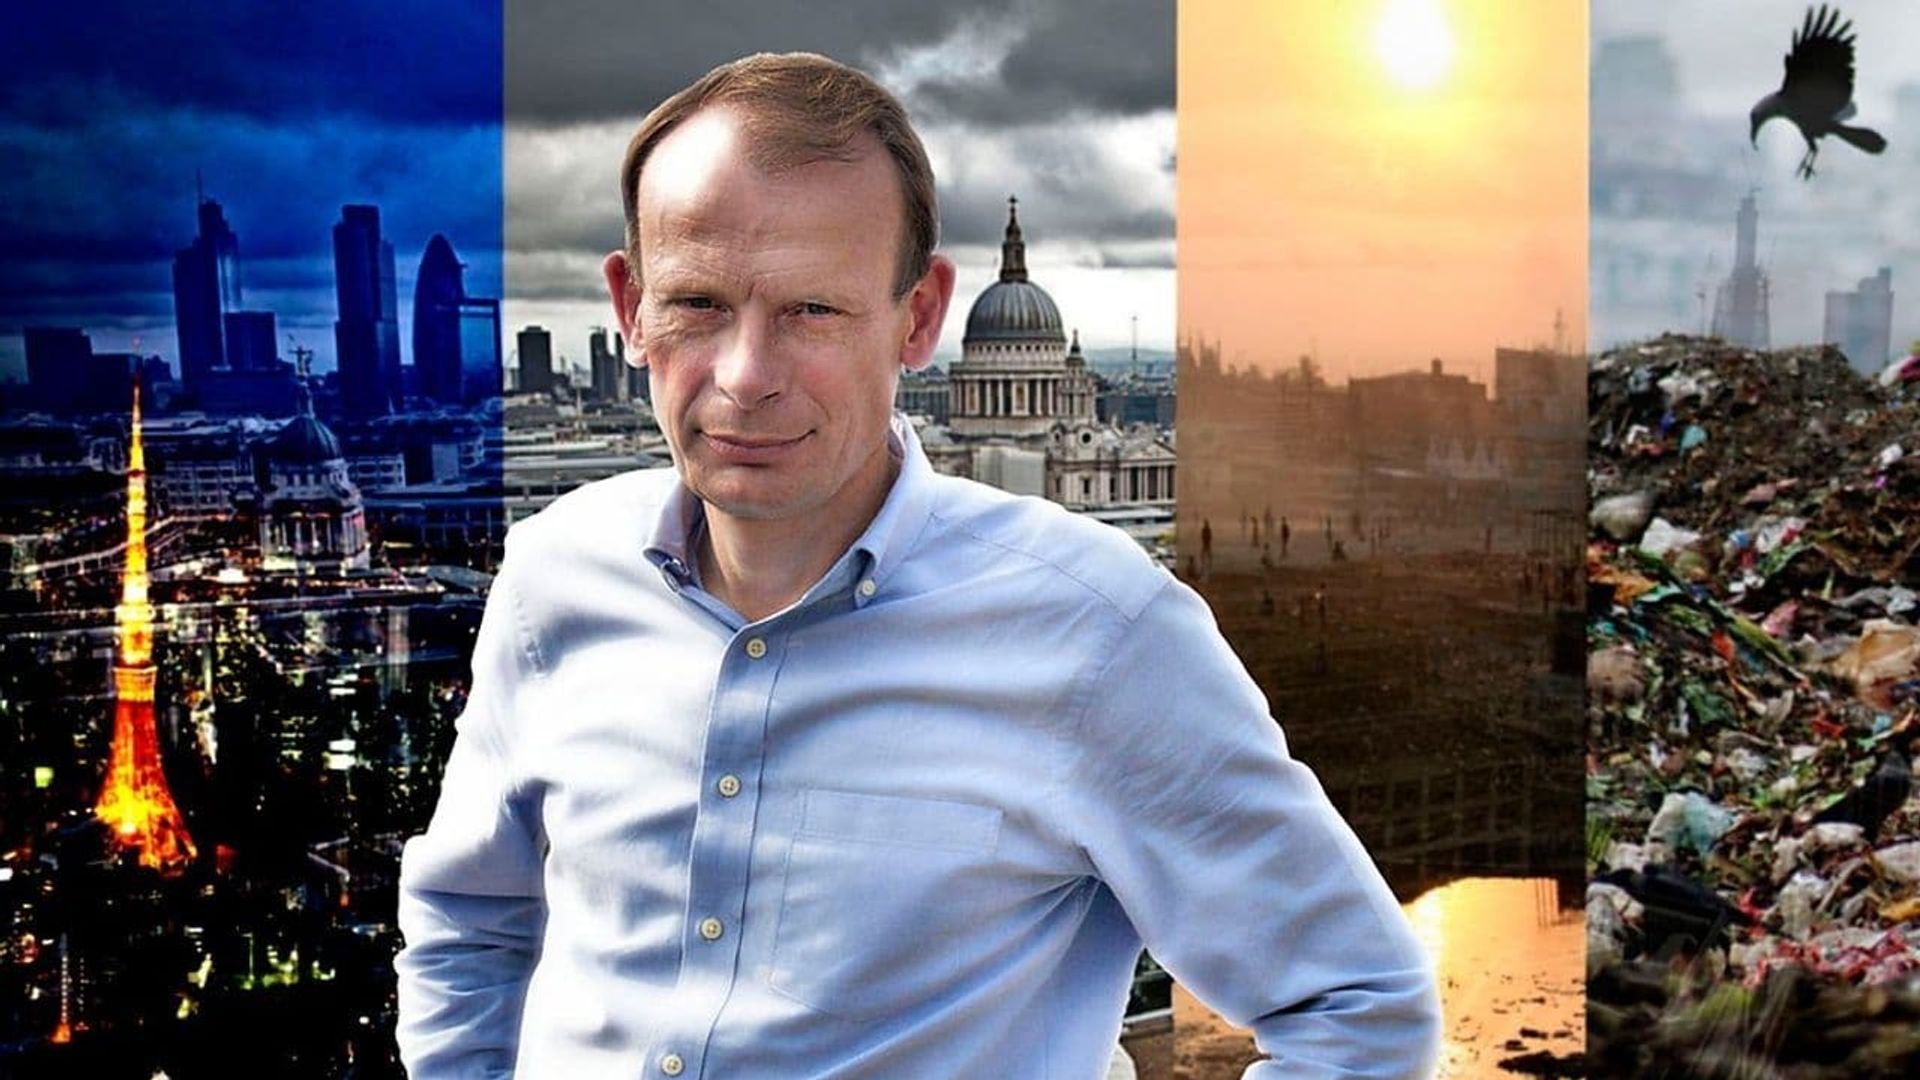 Andrew Marr's Megacities background